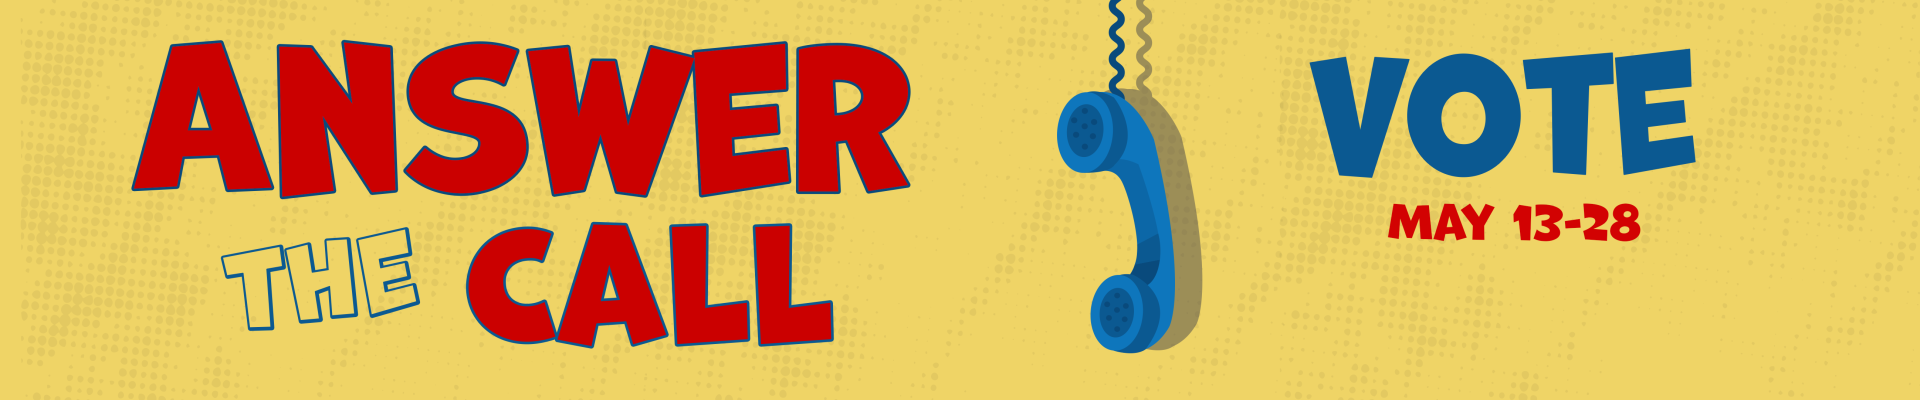 Answer the Call - Vote May 13-28